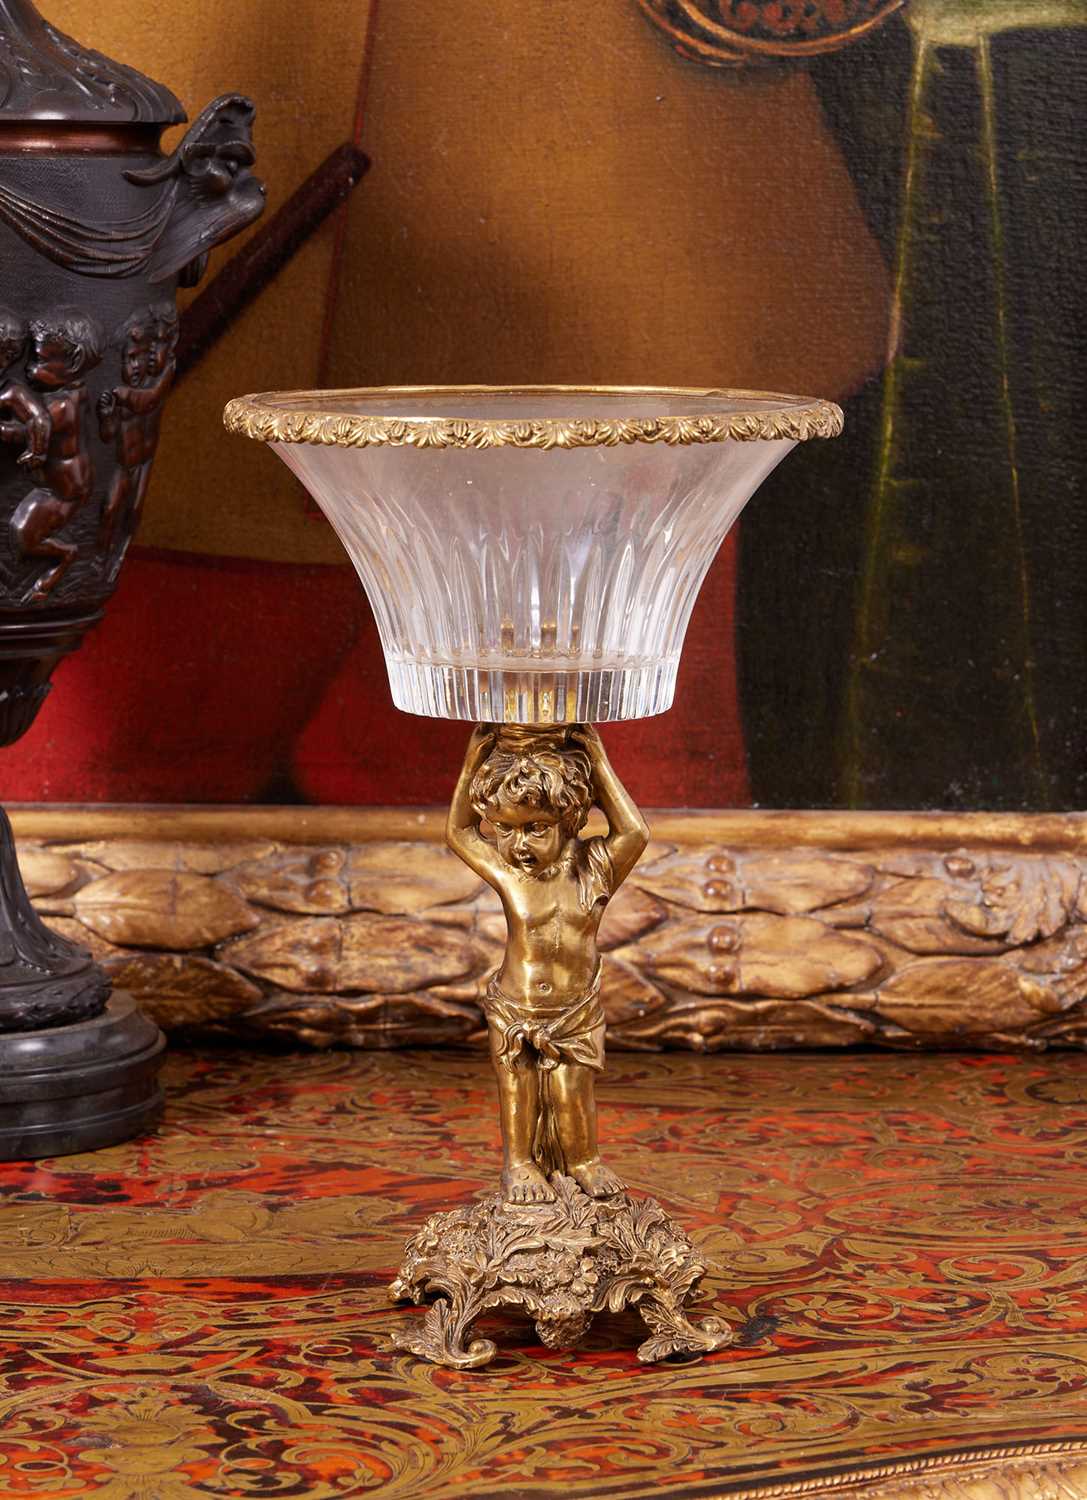 AN EMPIRE STYLE GILT BRONZE AND GLASS FIGURAL CENTREPIECE